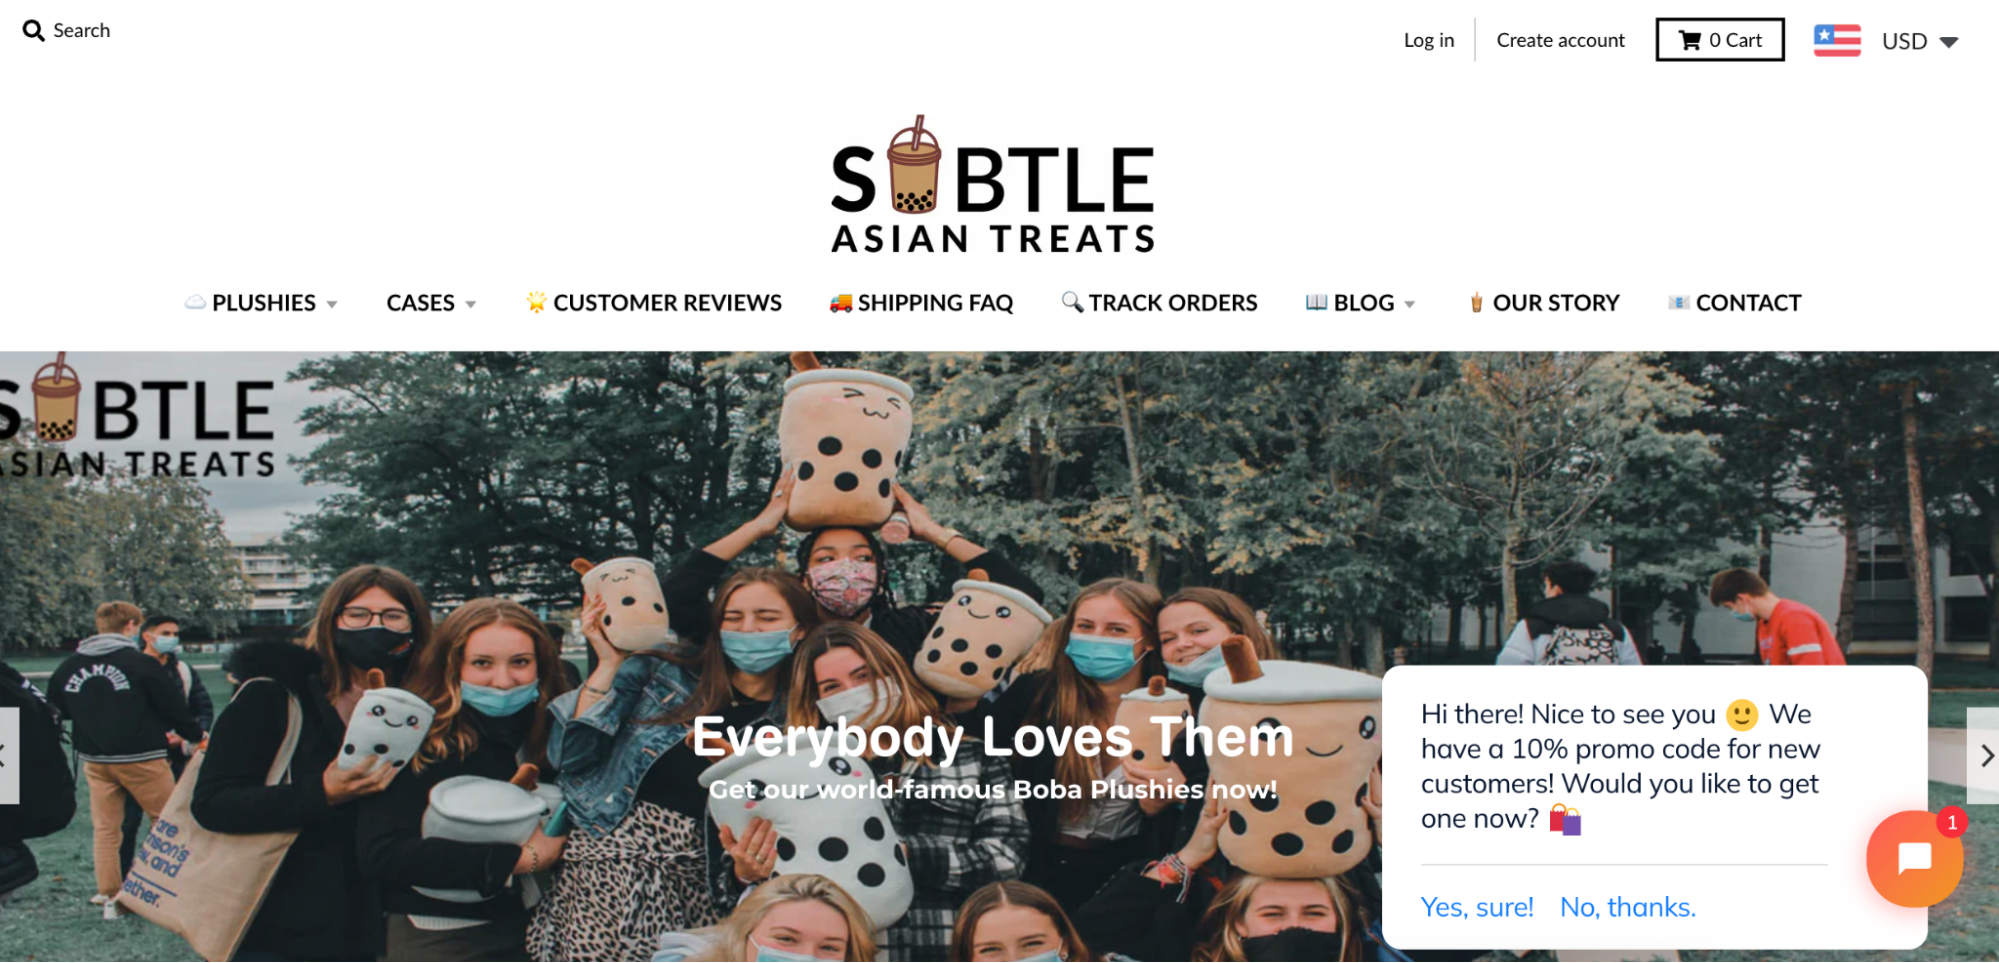 The homepage of Subtle, which sells Boba plushies and other novelty items online.